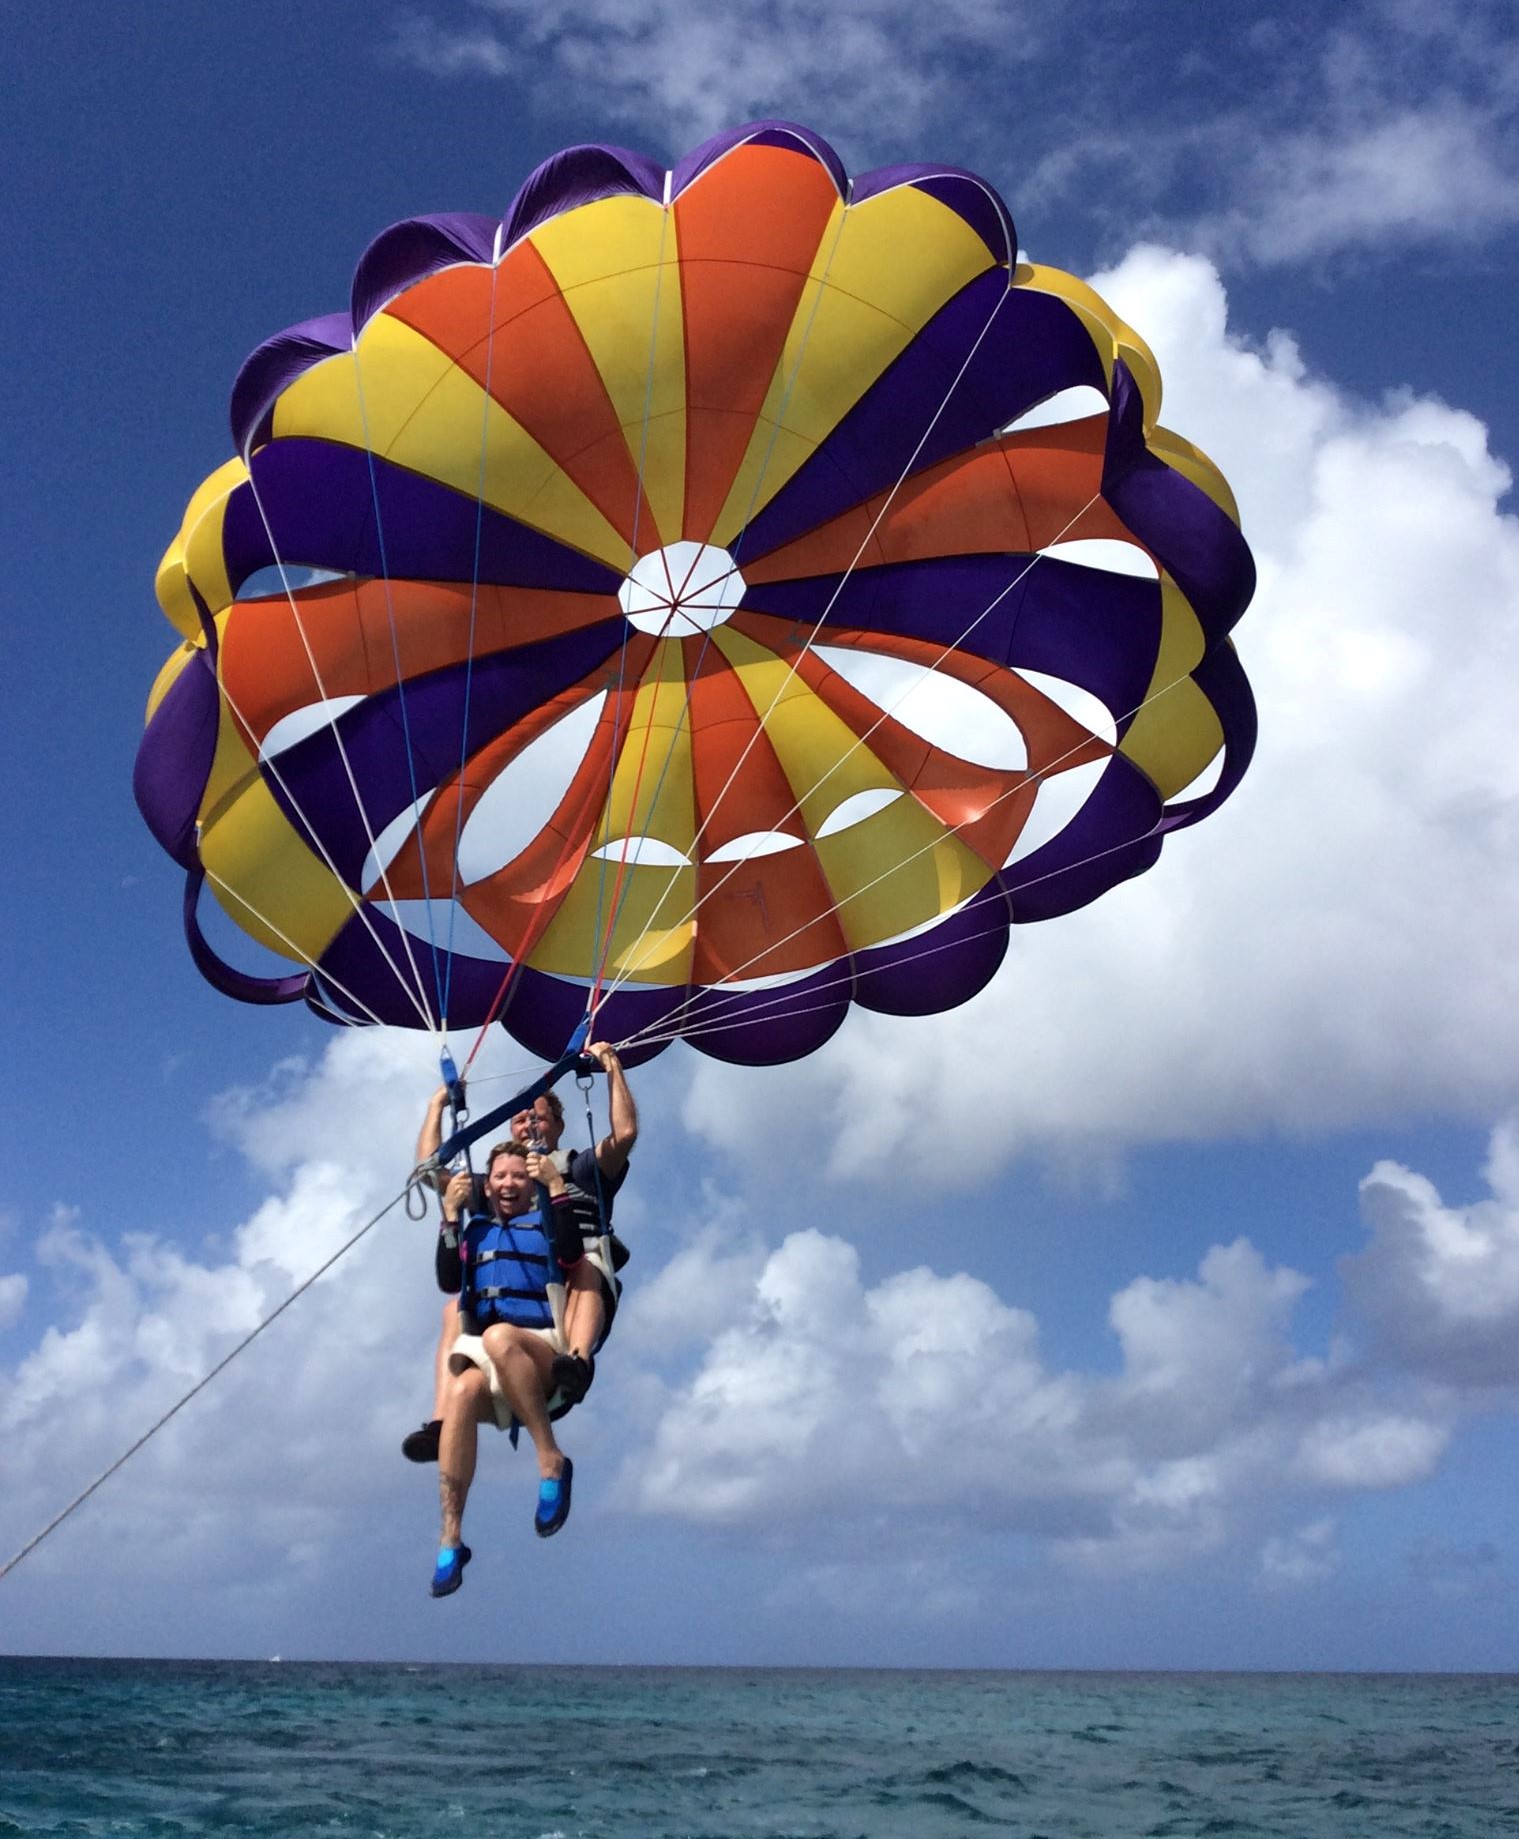 PARASAILING EXCITEMENT BY AWC Aruba - Vacationstore.net